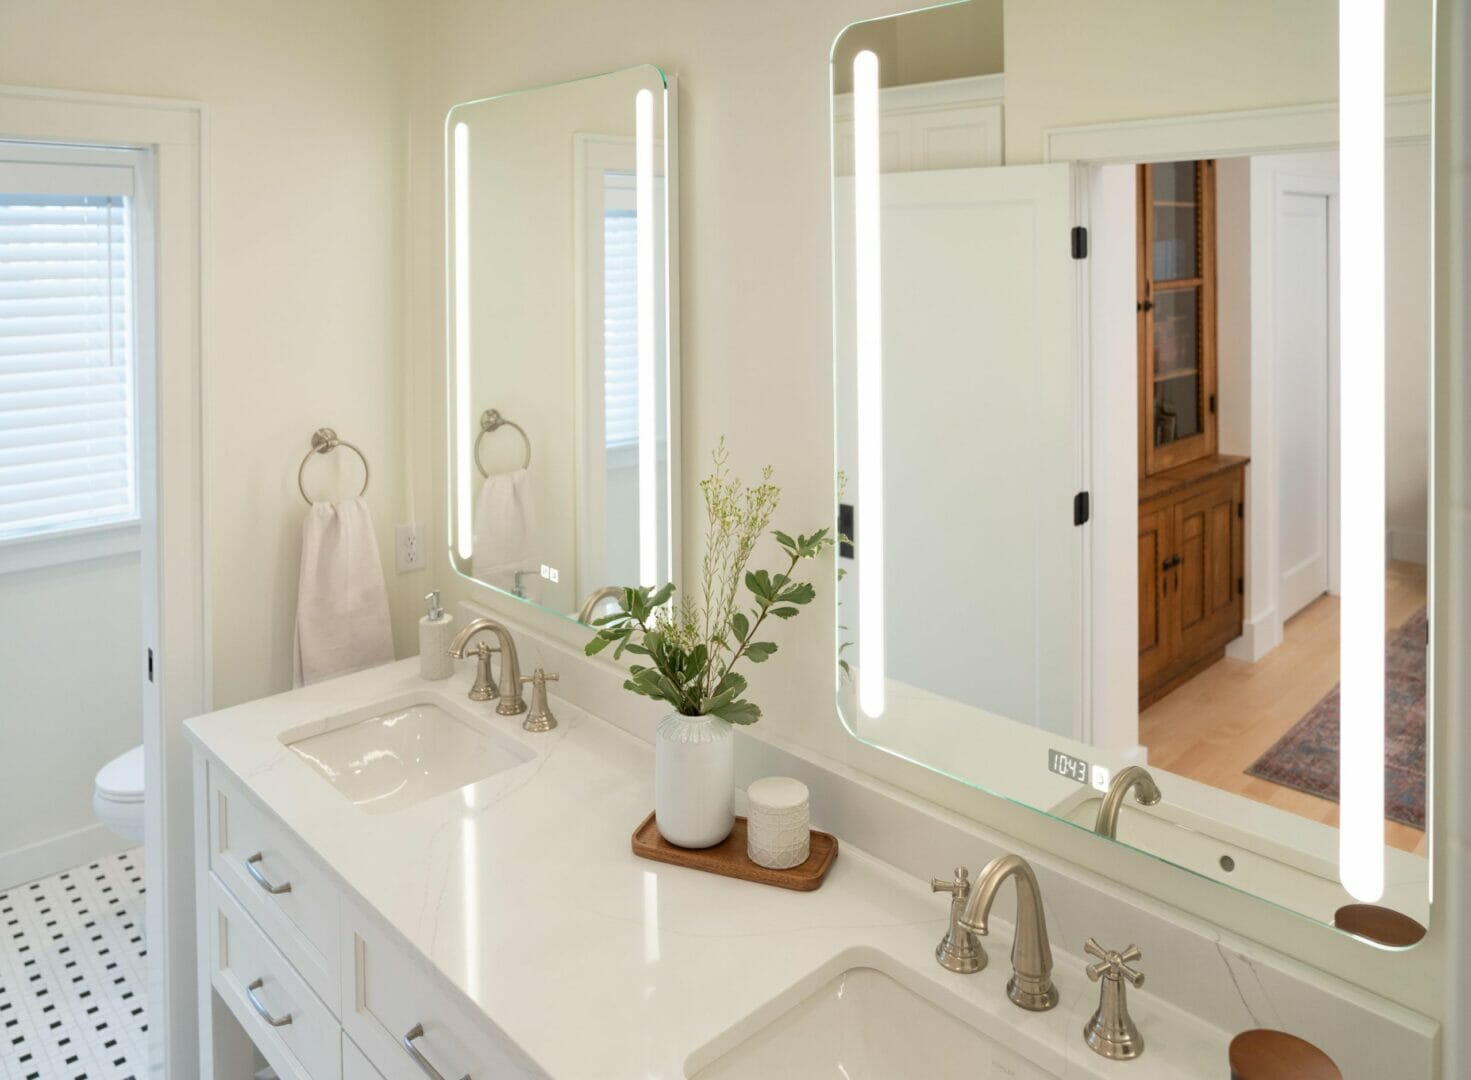 Séura® Lighted Mirrors Are Climbing the List of Must-Haves for Luxurious Room Design.